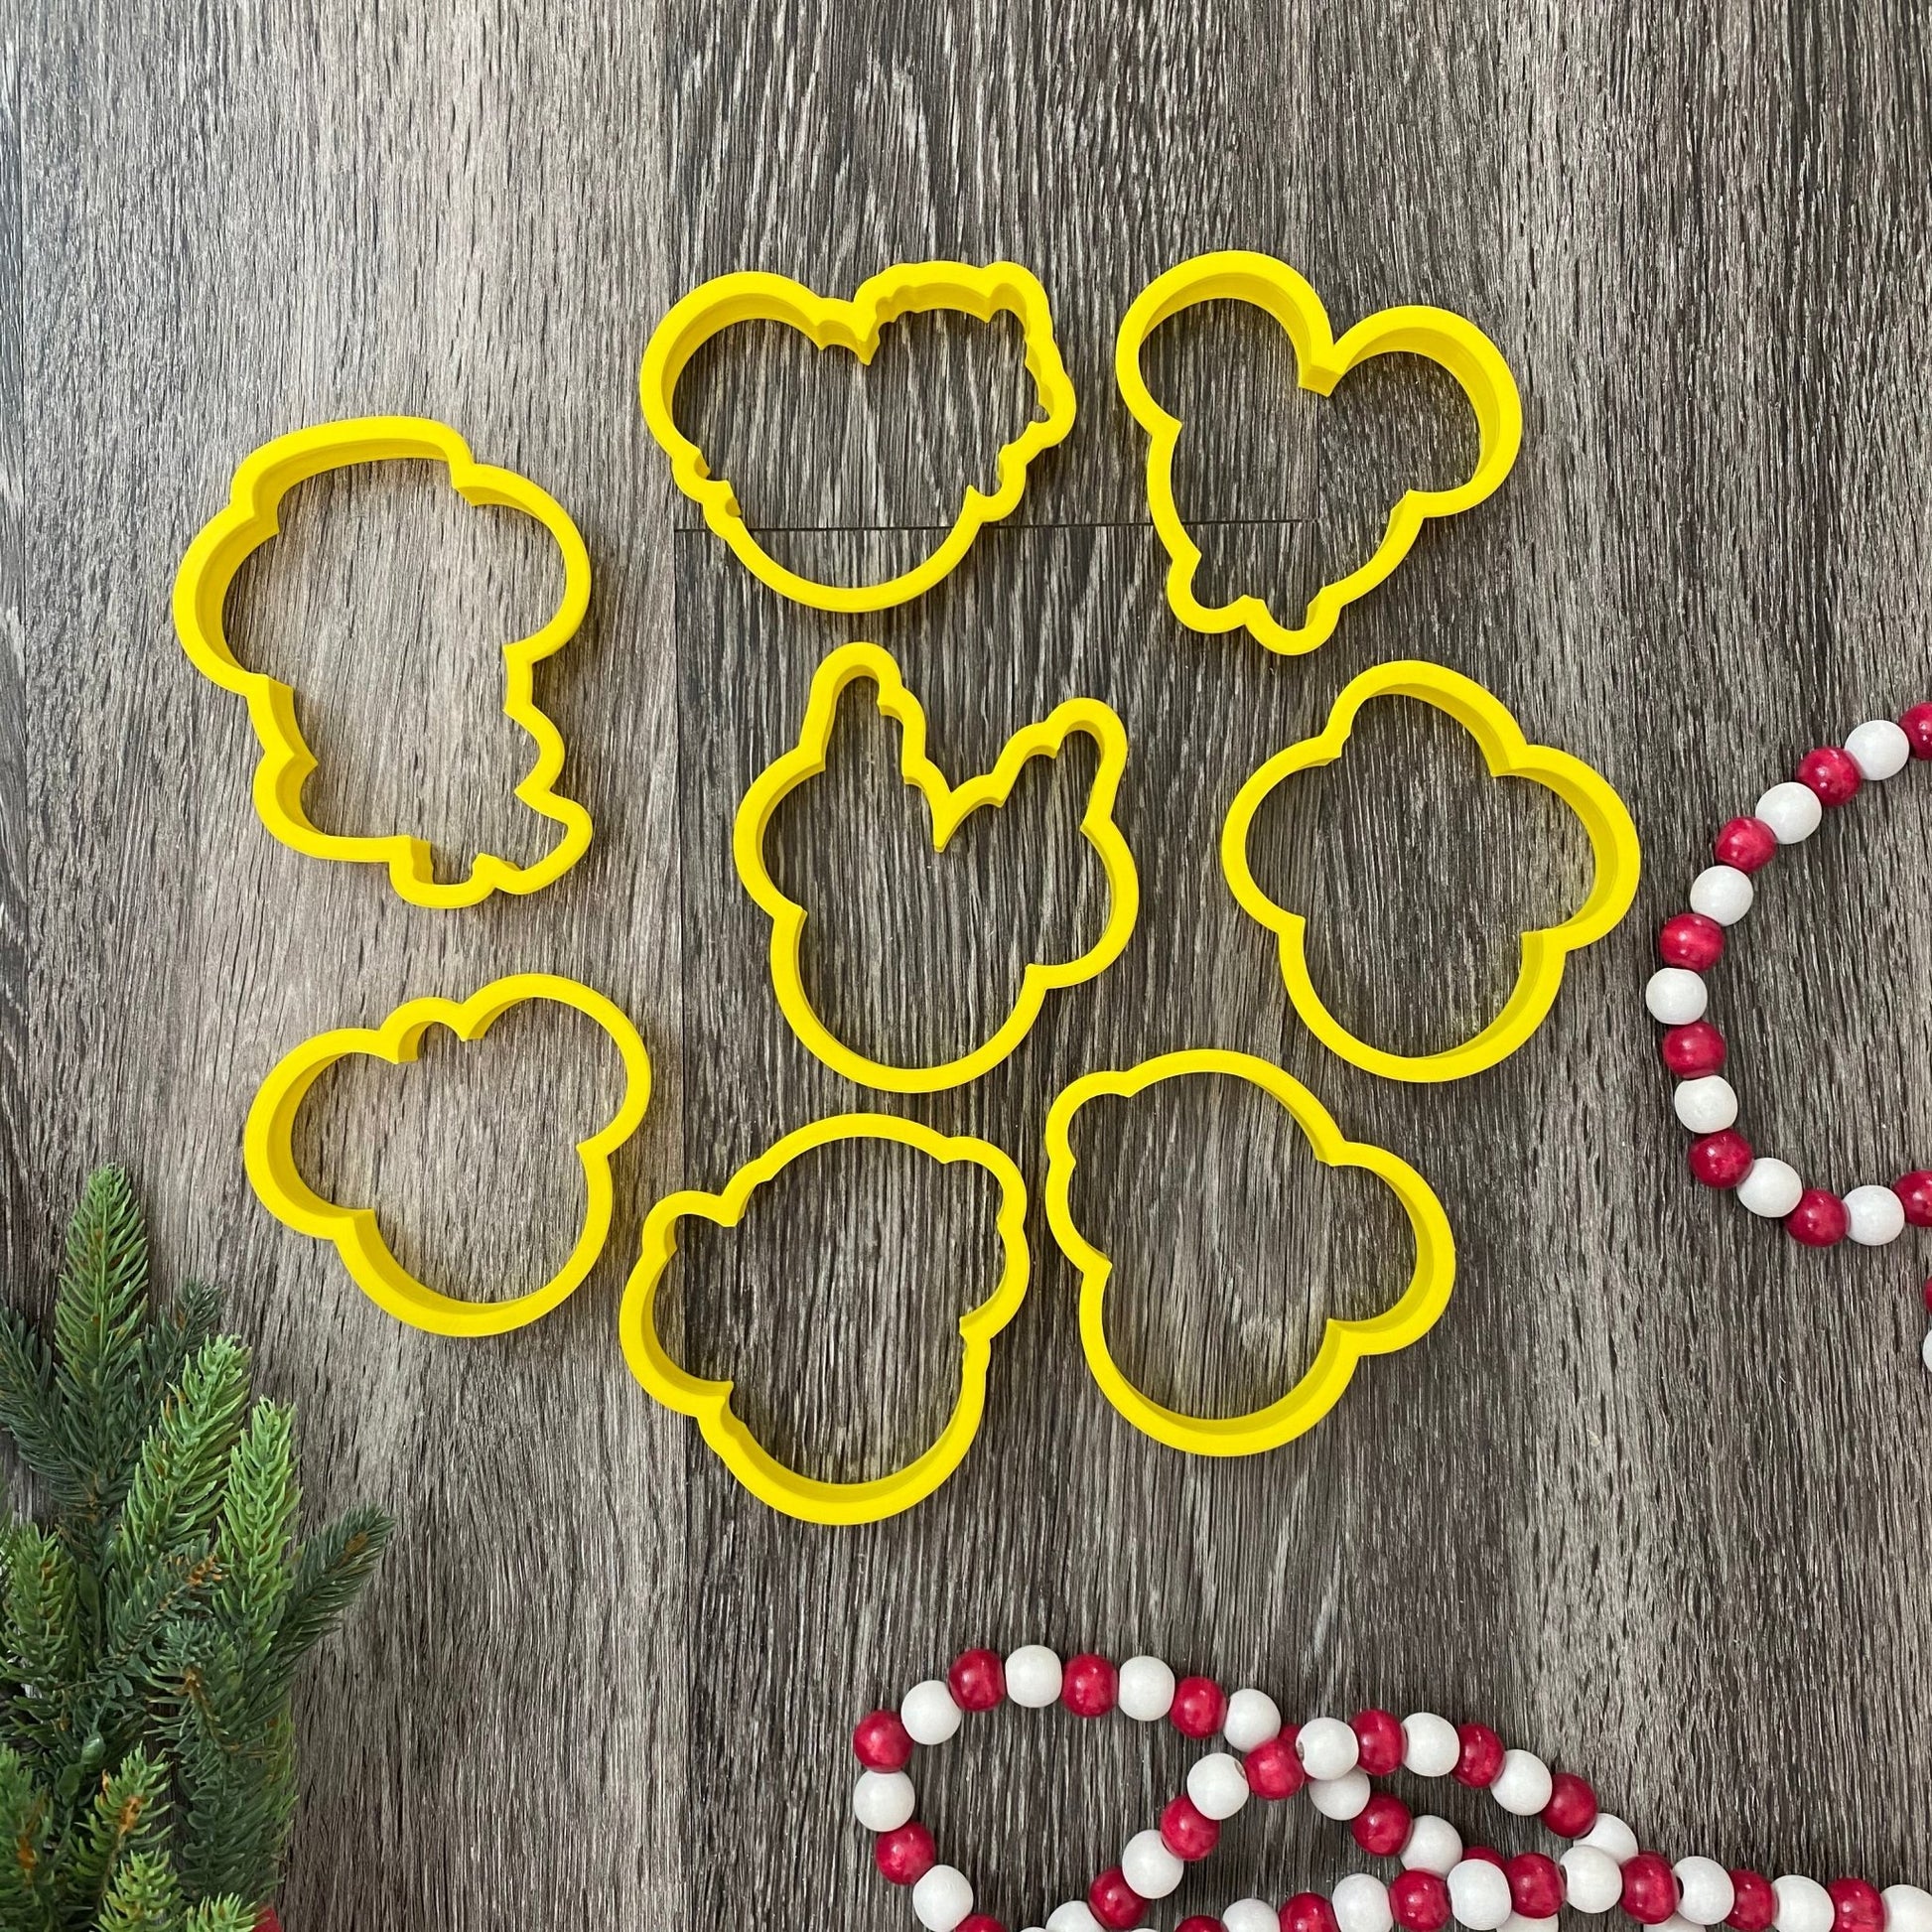 Mouse Elf Hat Cookie Cutter - Periwinkles Cutters